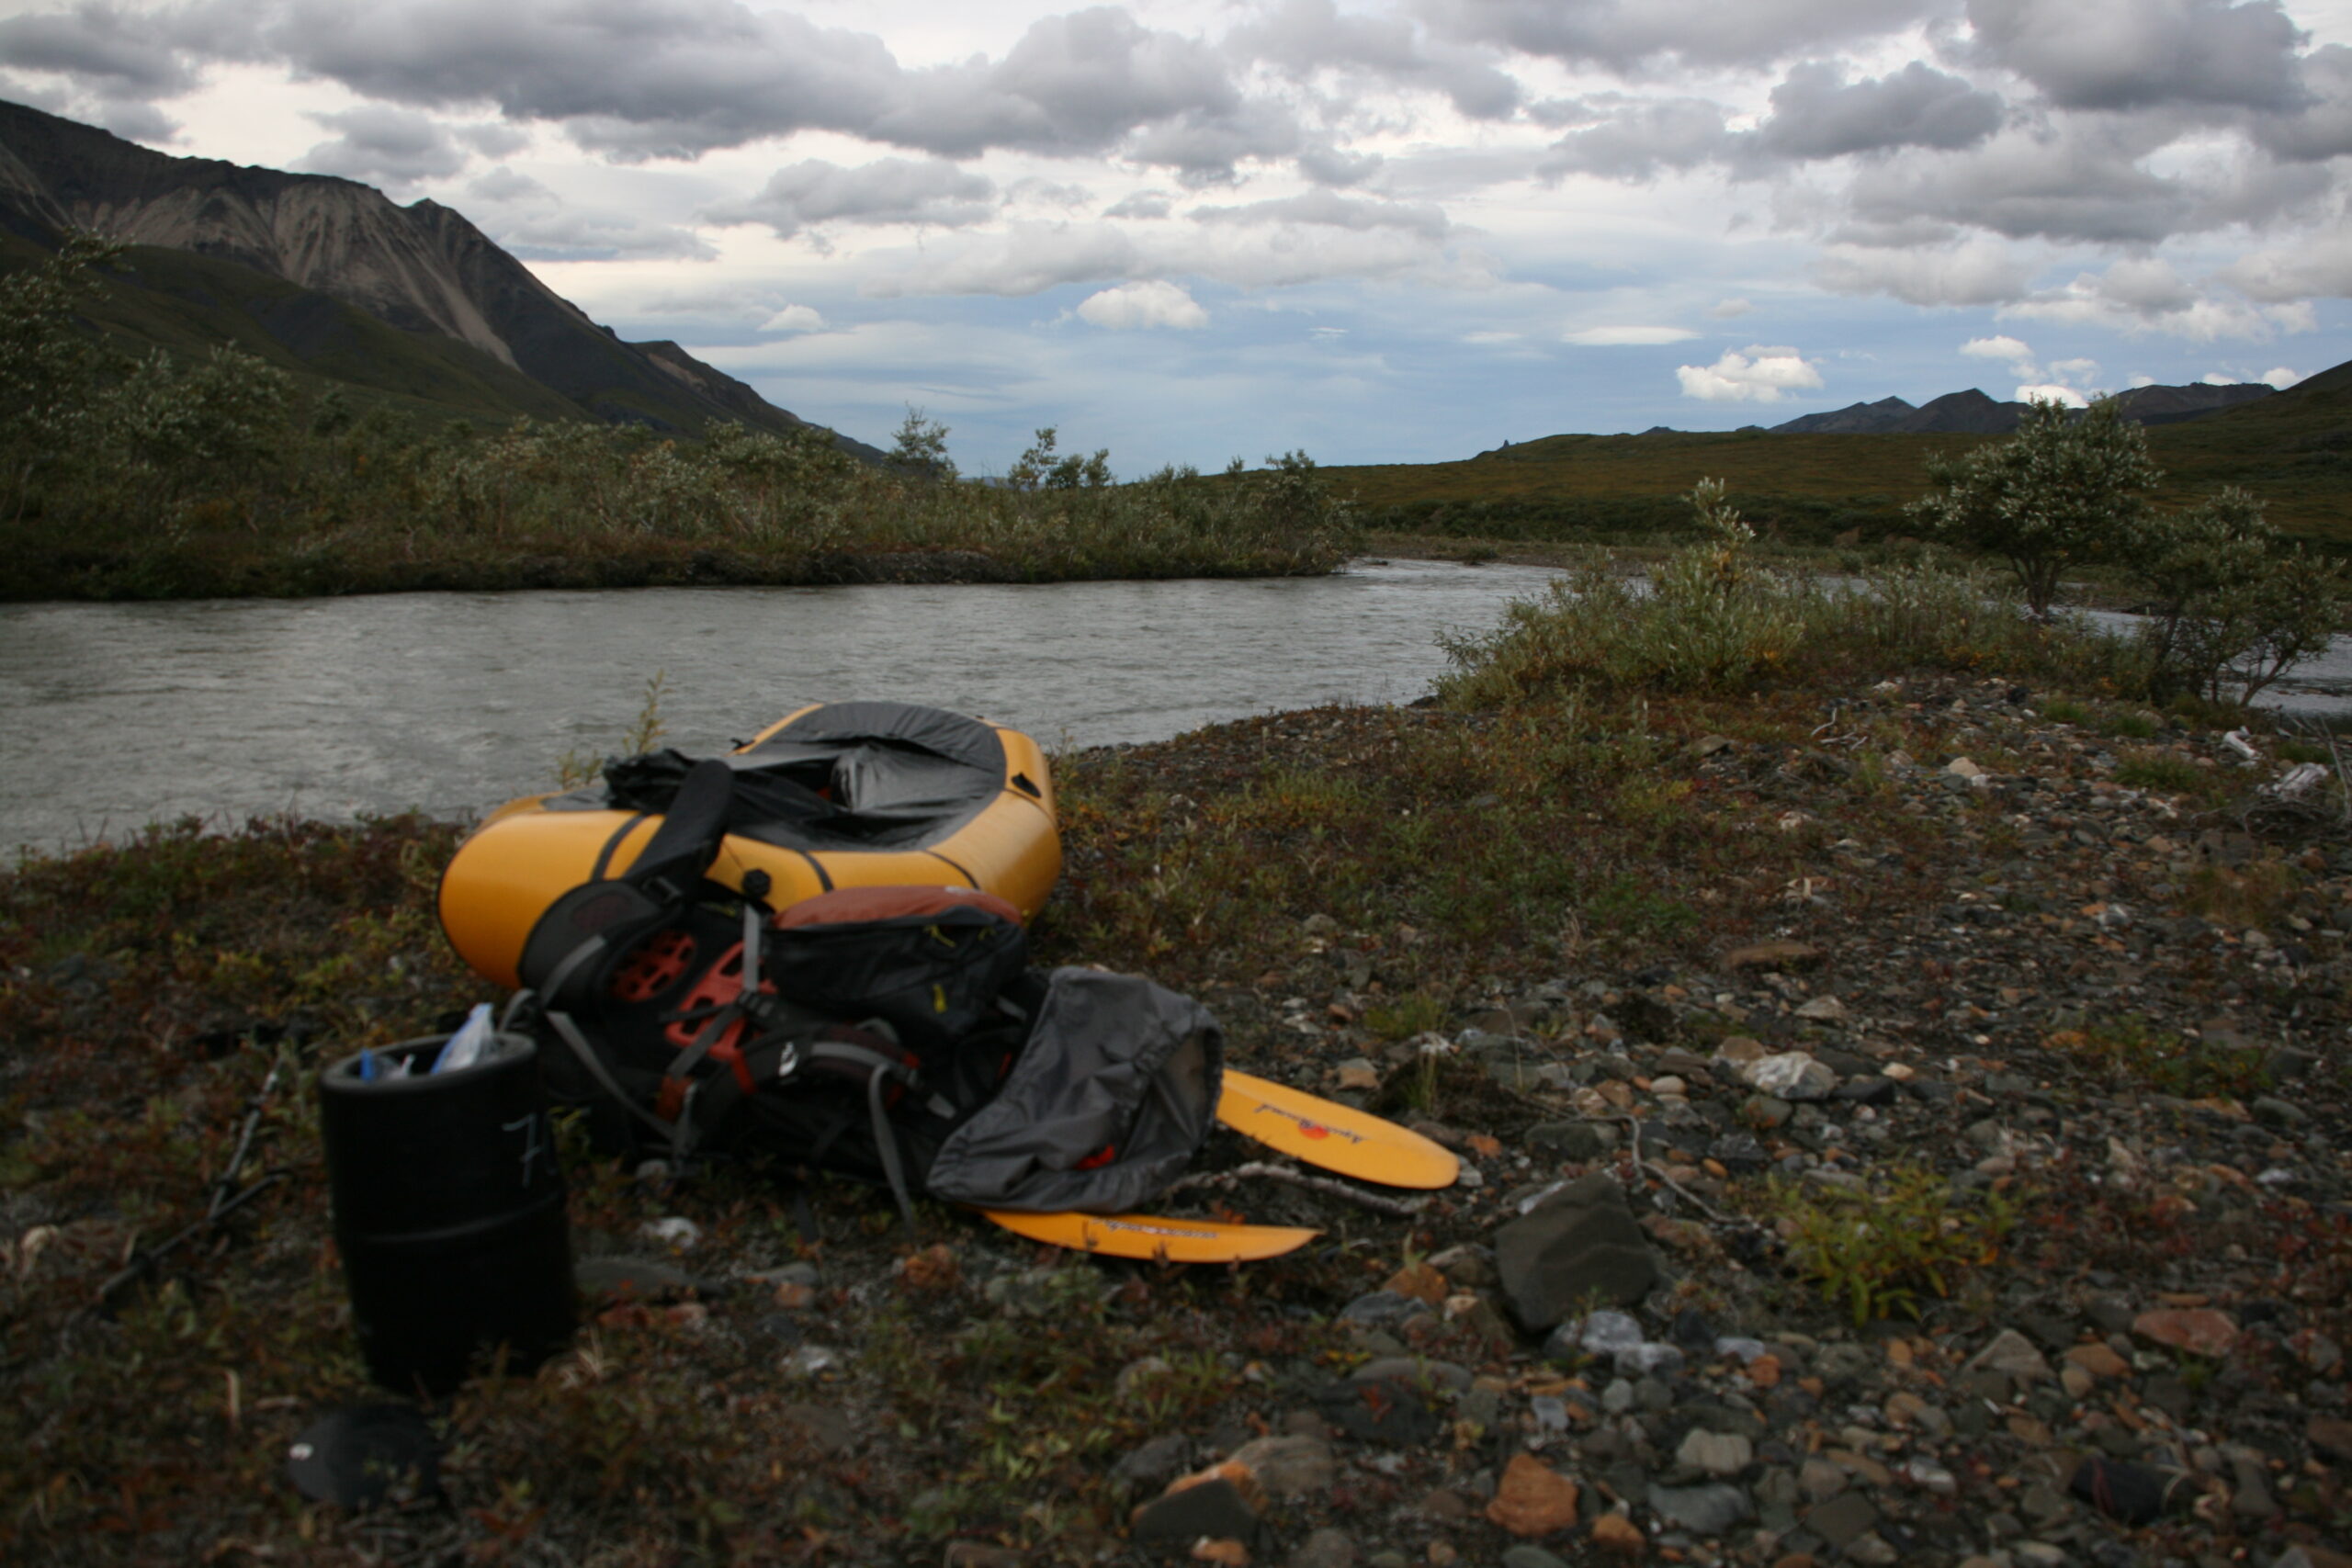 A packraft, a boat light enough to be carried in a backpack, sits on the edge of Sanctuary River in Denali National Park, Alaska.